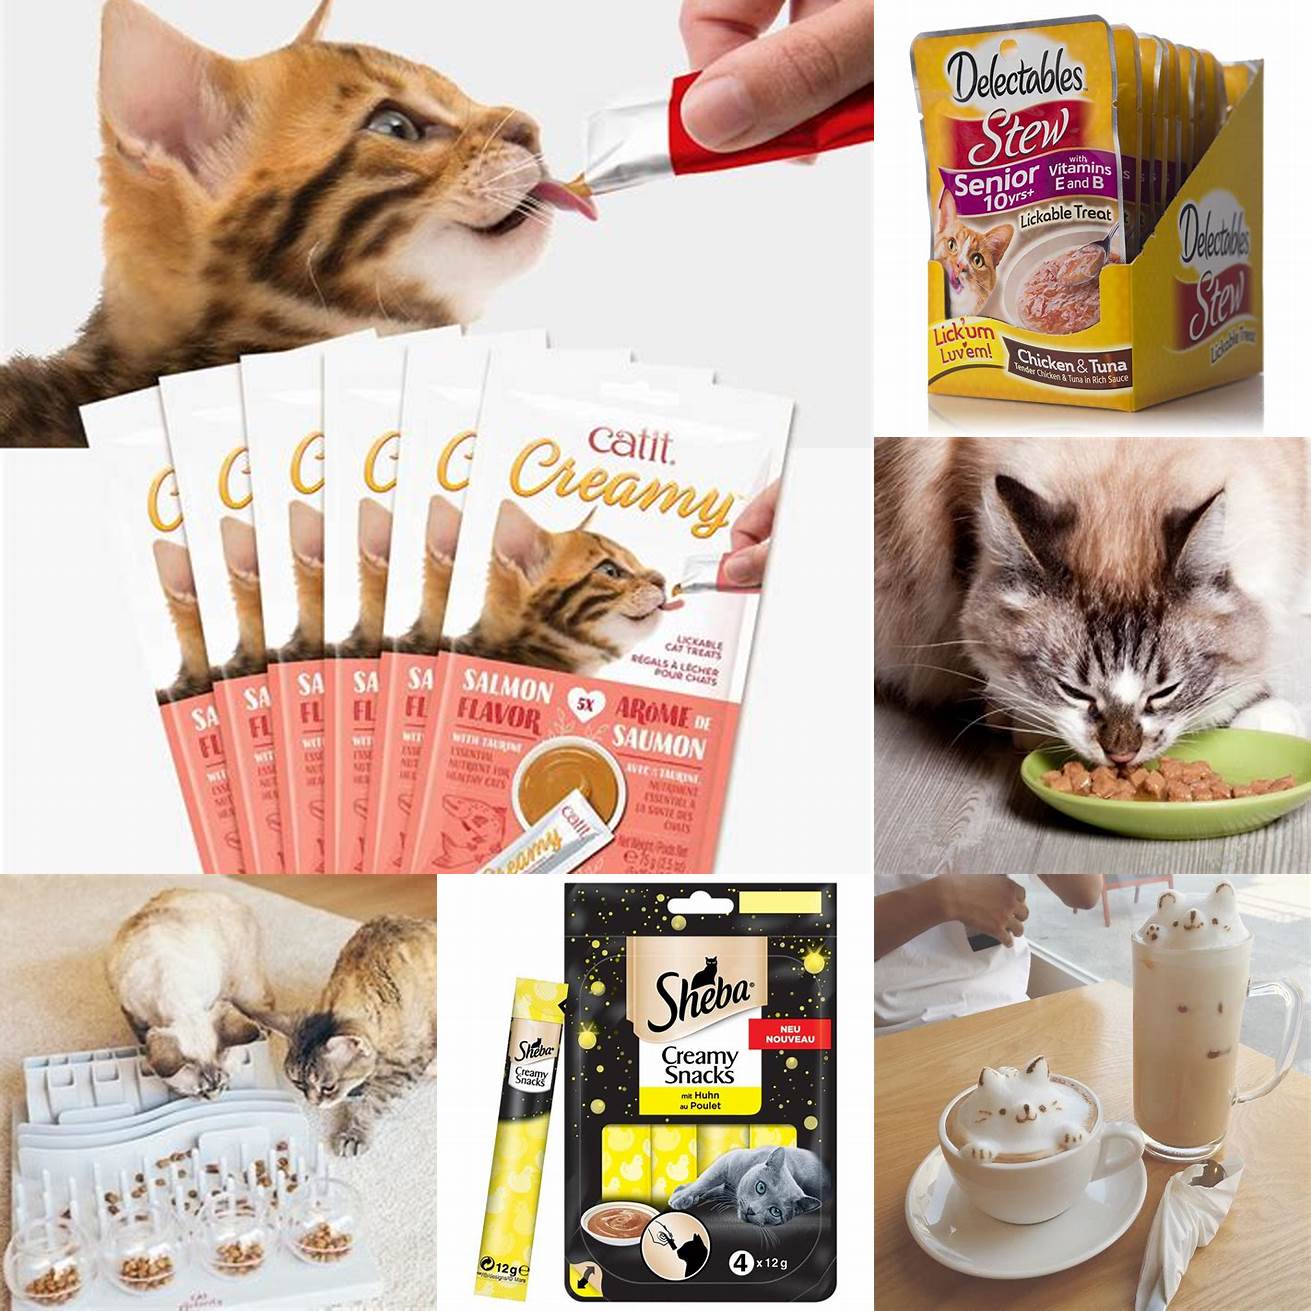 Cat-friendly snacks and drinks